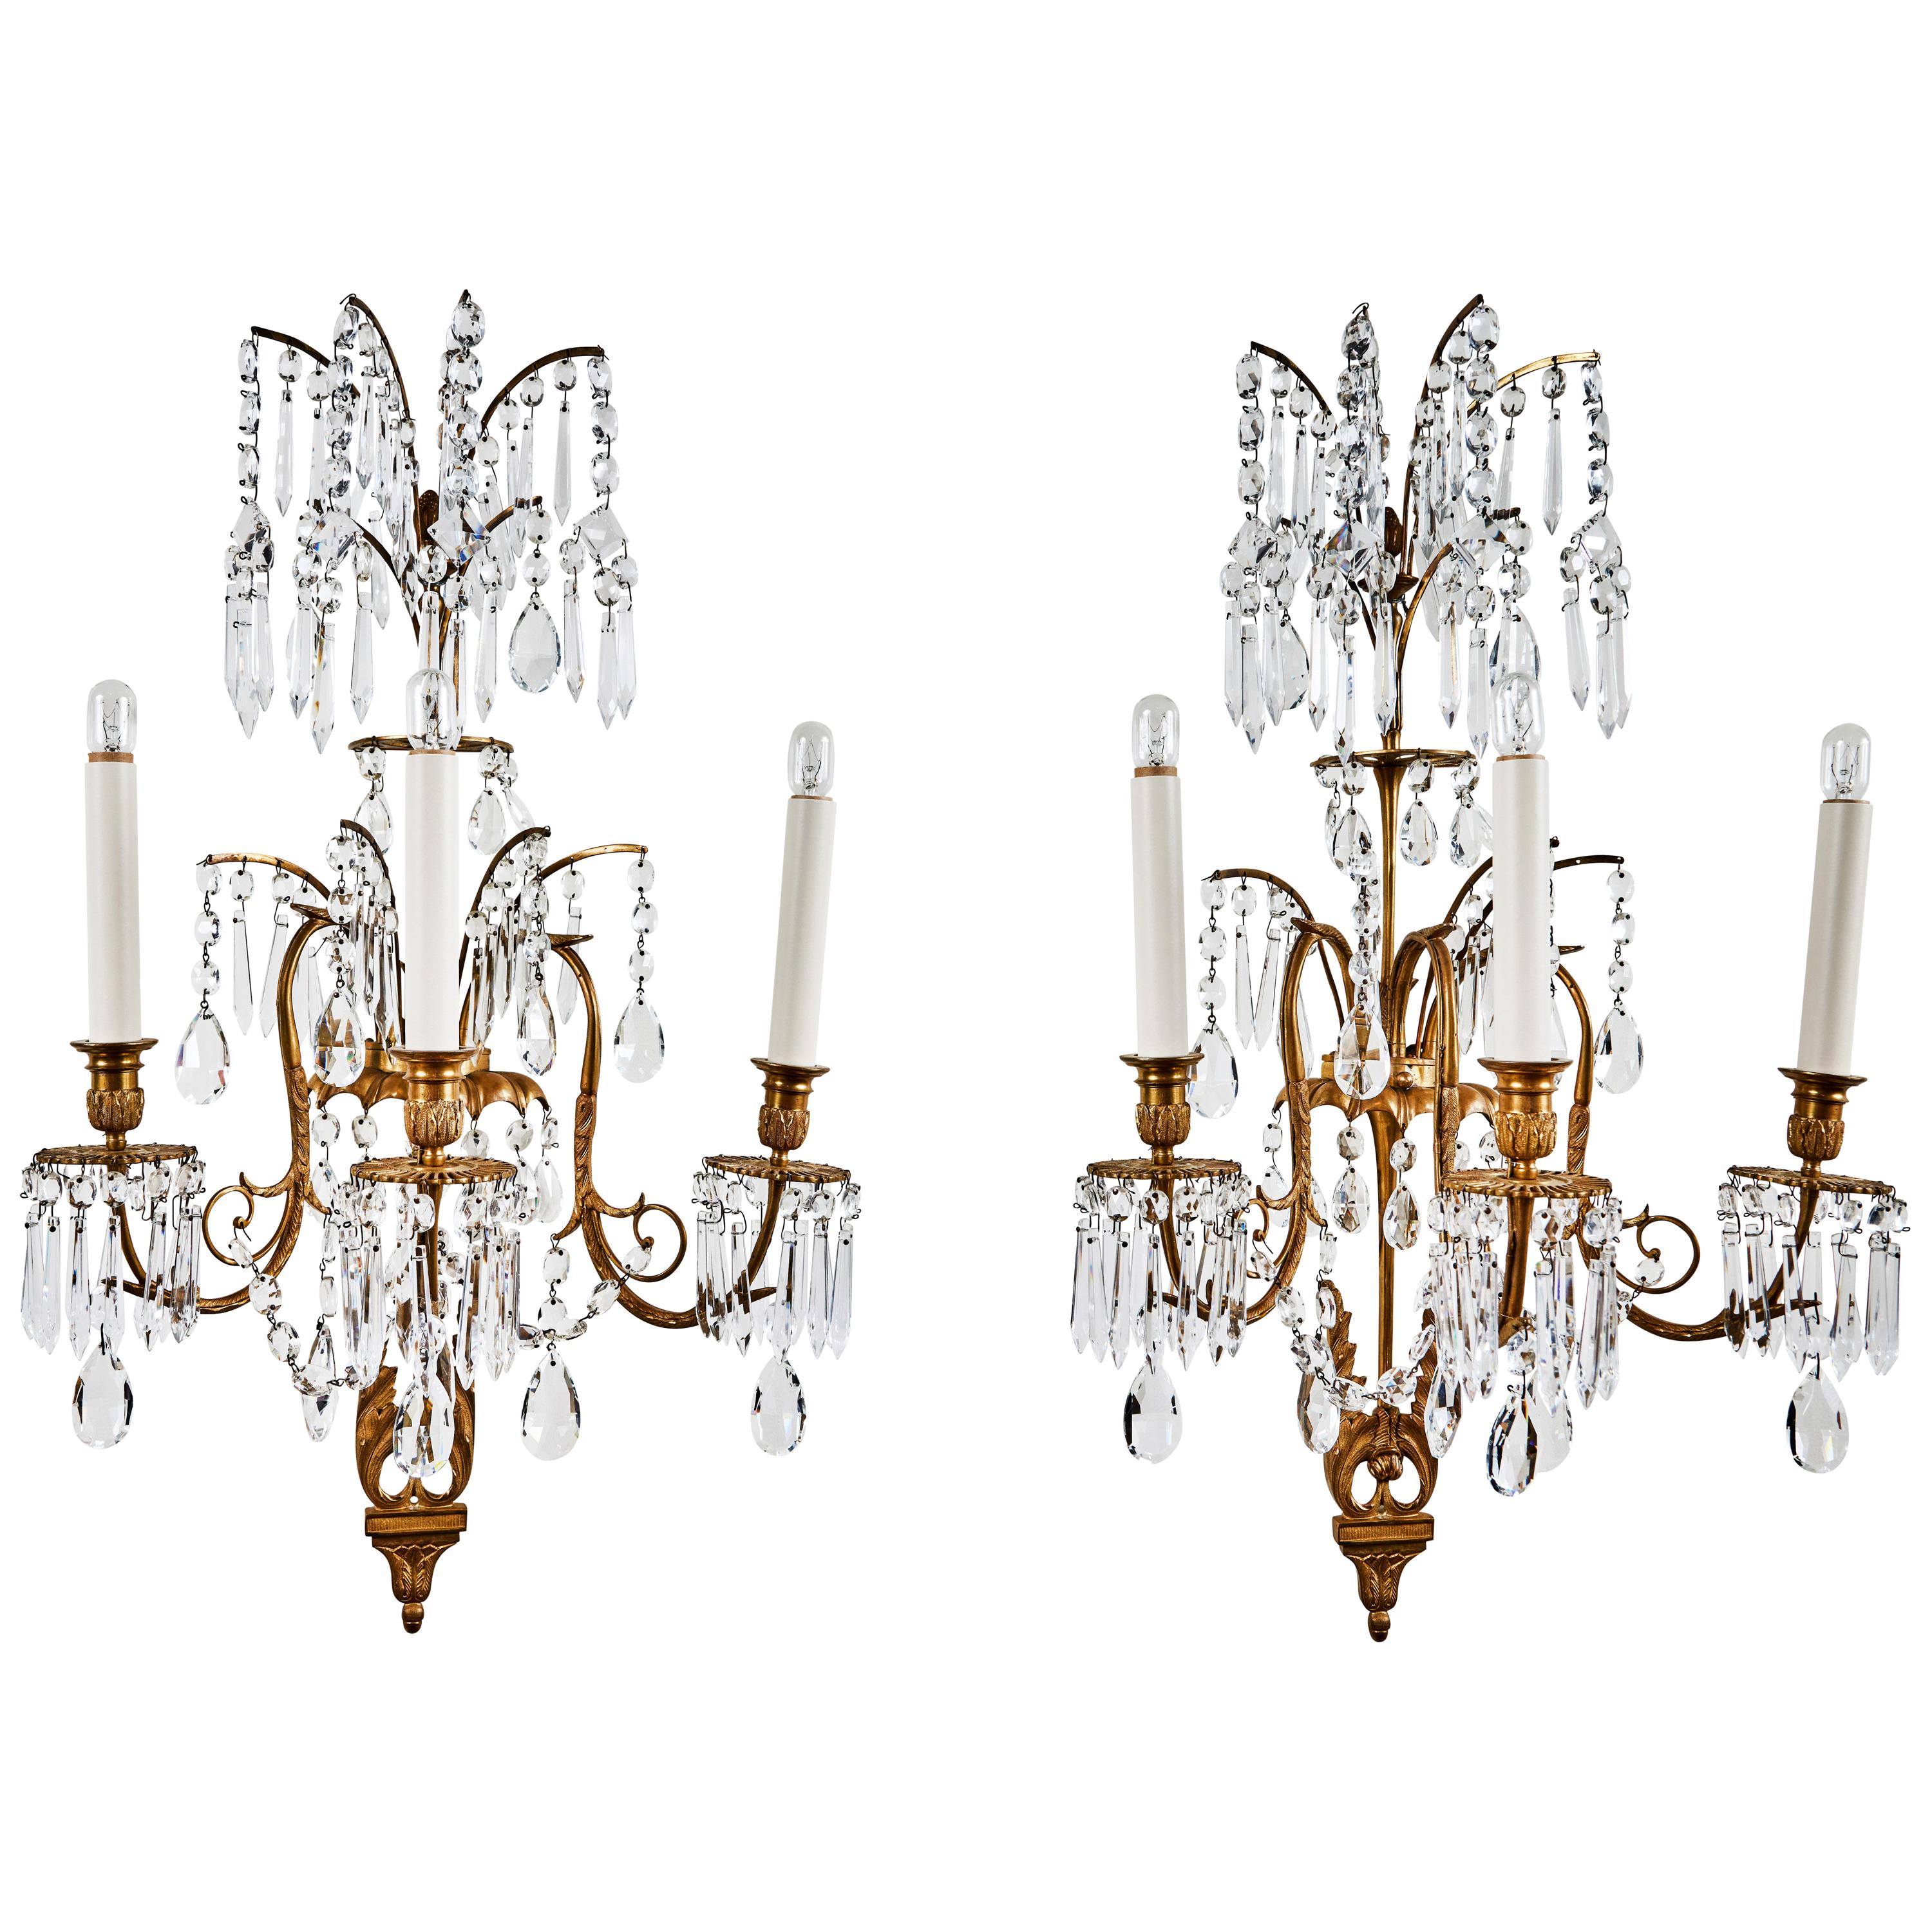 Suite of Russian, Cut Crystal Sconces For Sale